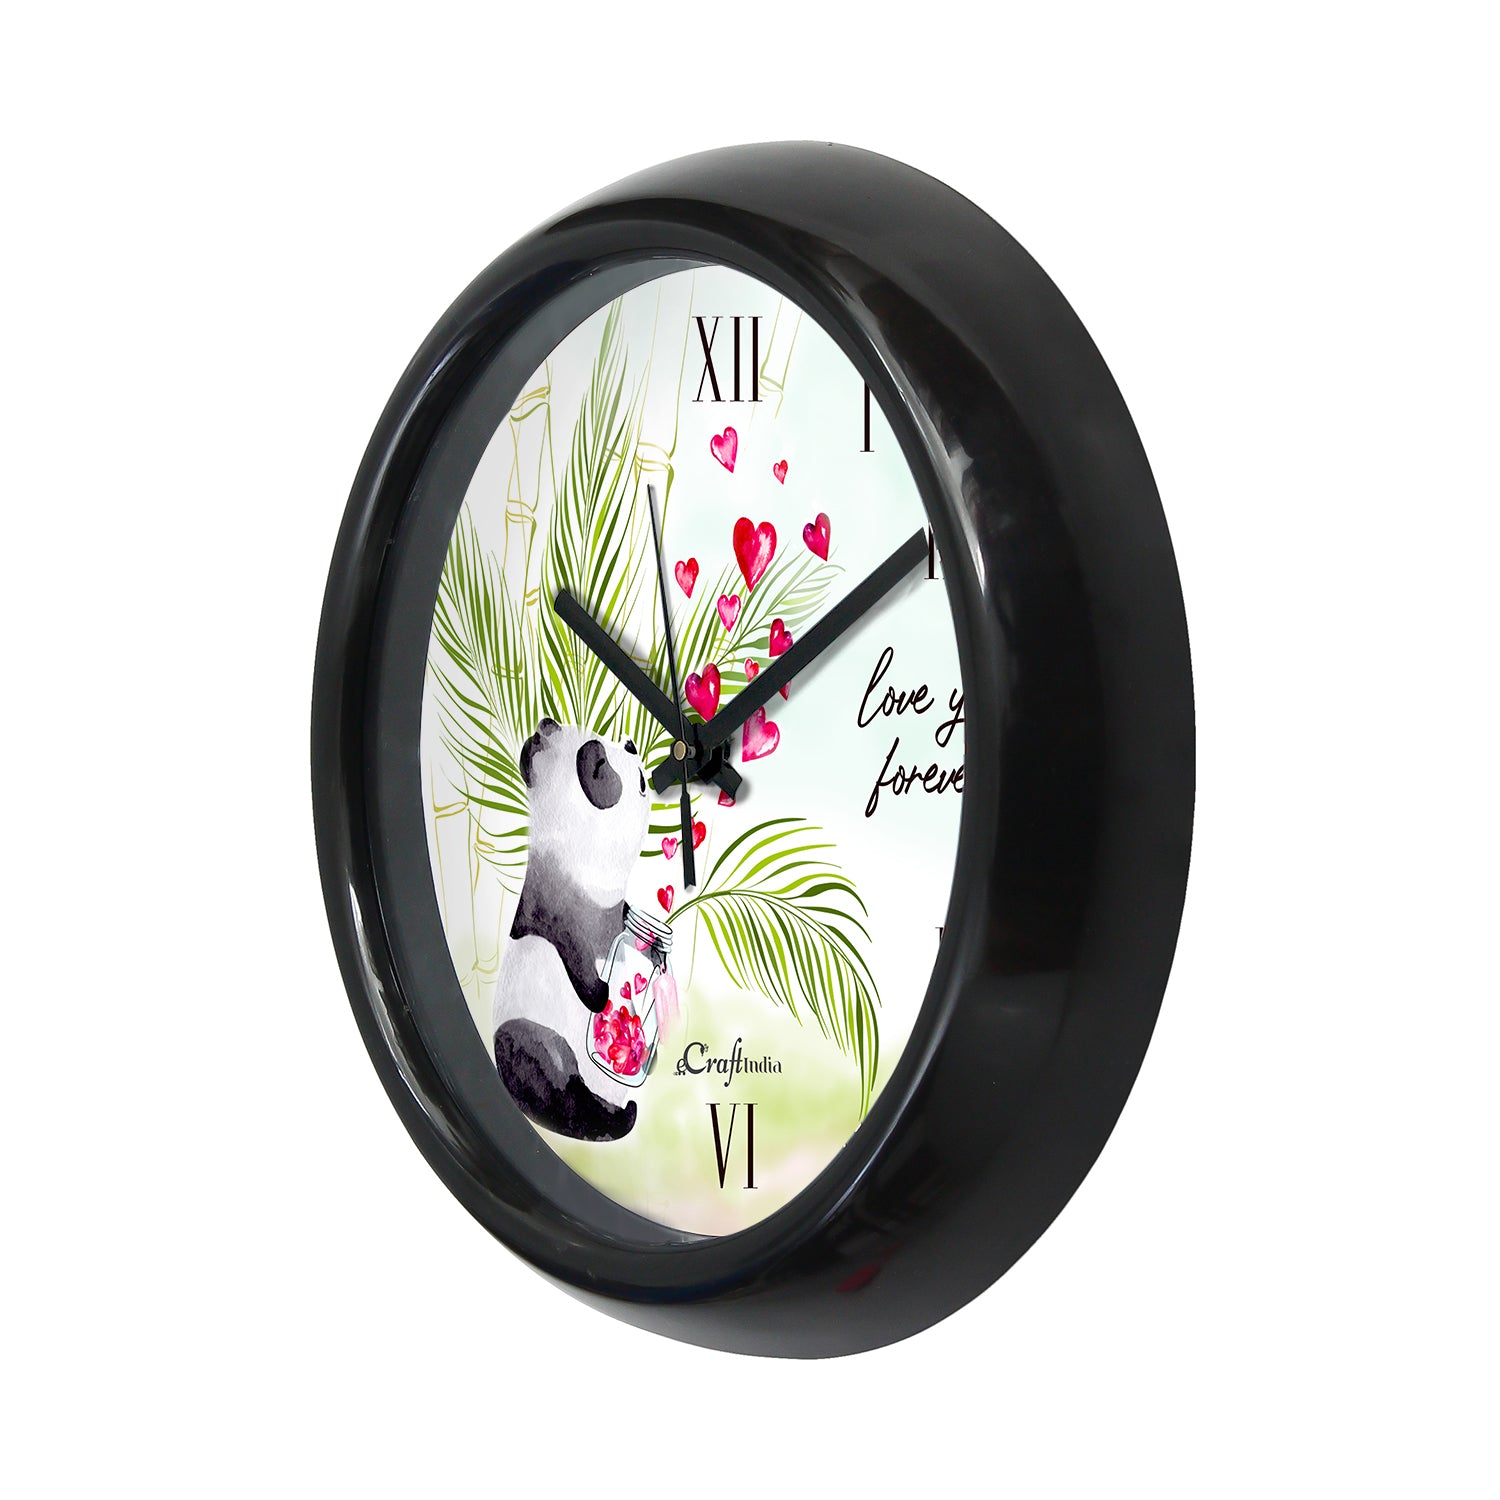 Romantic Panda And Love You Forever Quote Round Shape Analog Designer Wall Clock 4